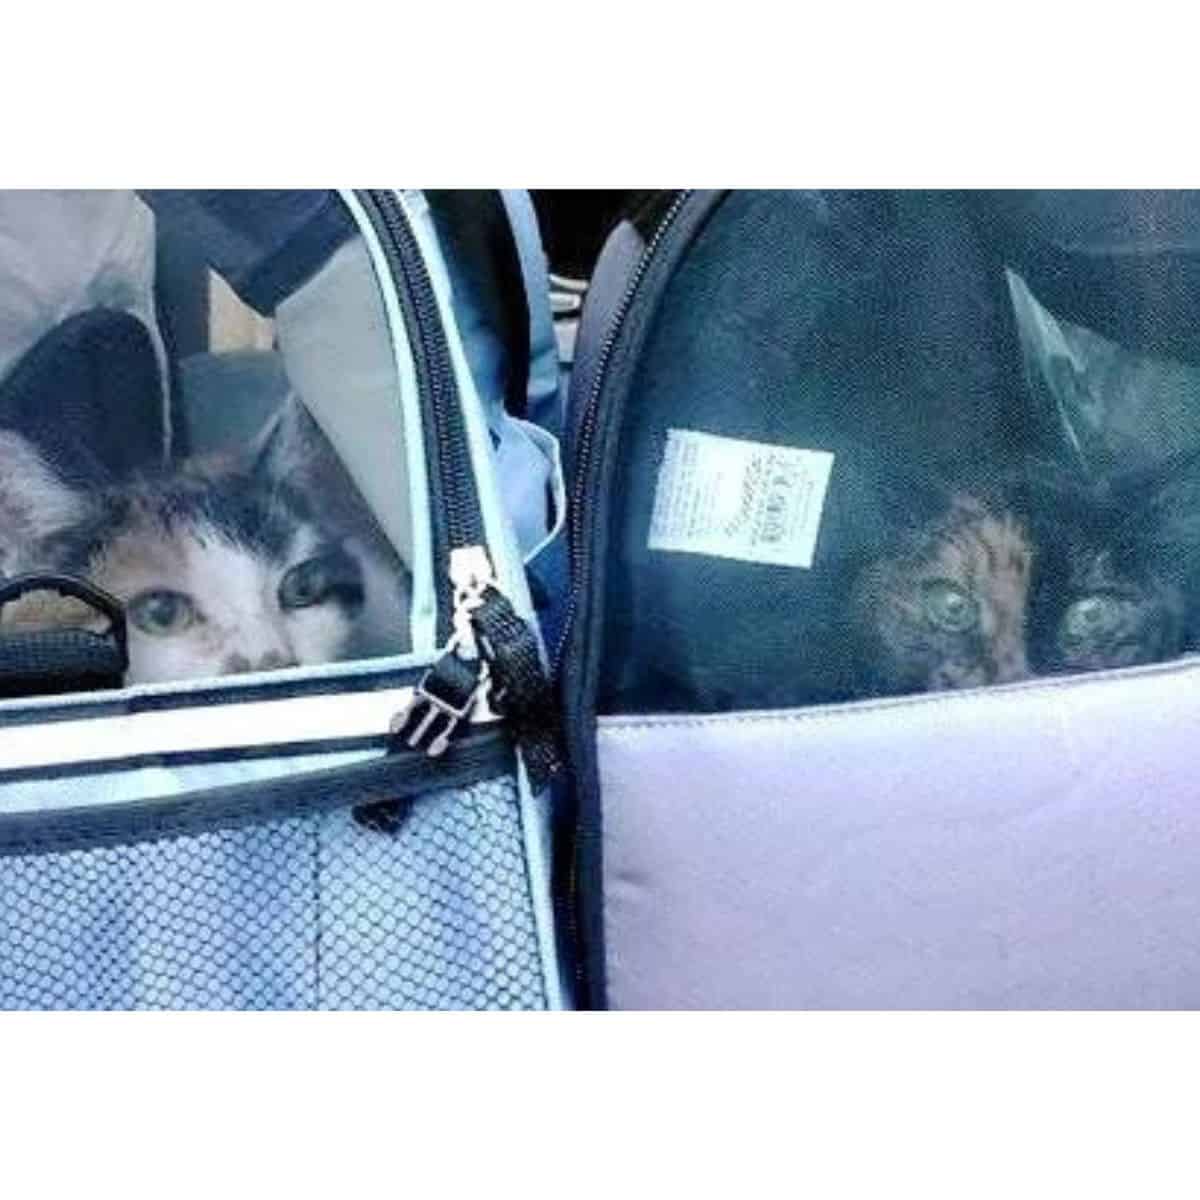 two cats in a cat bag